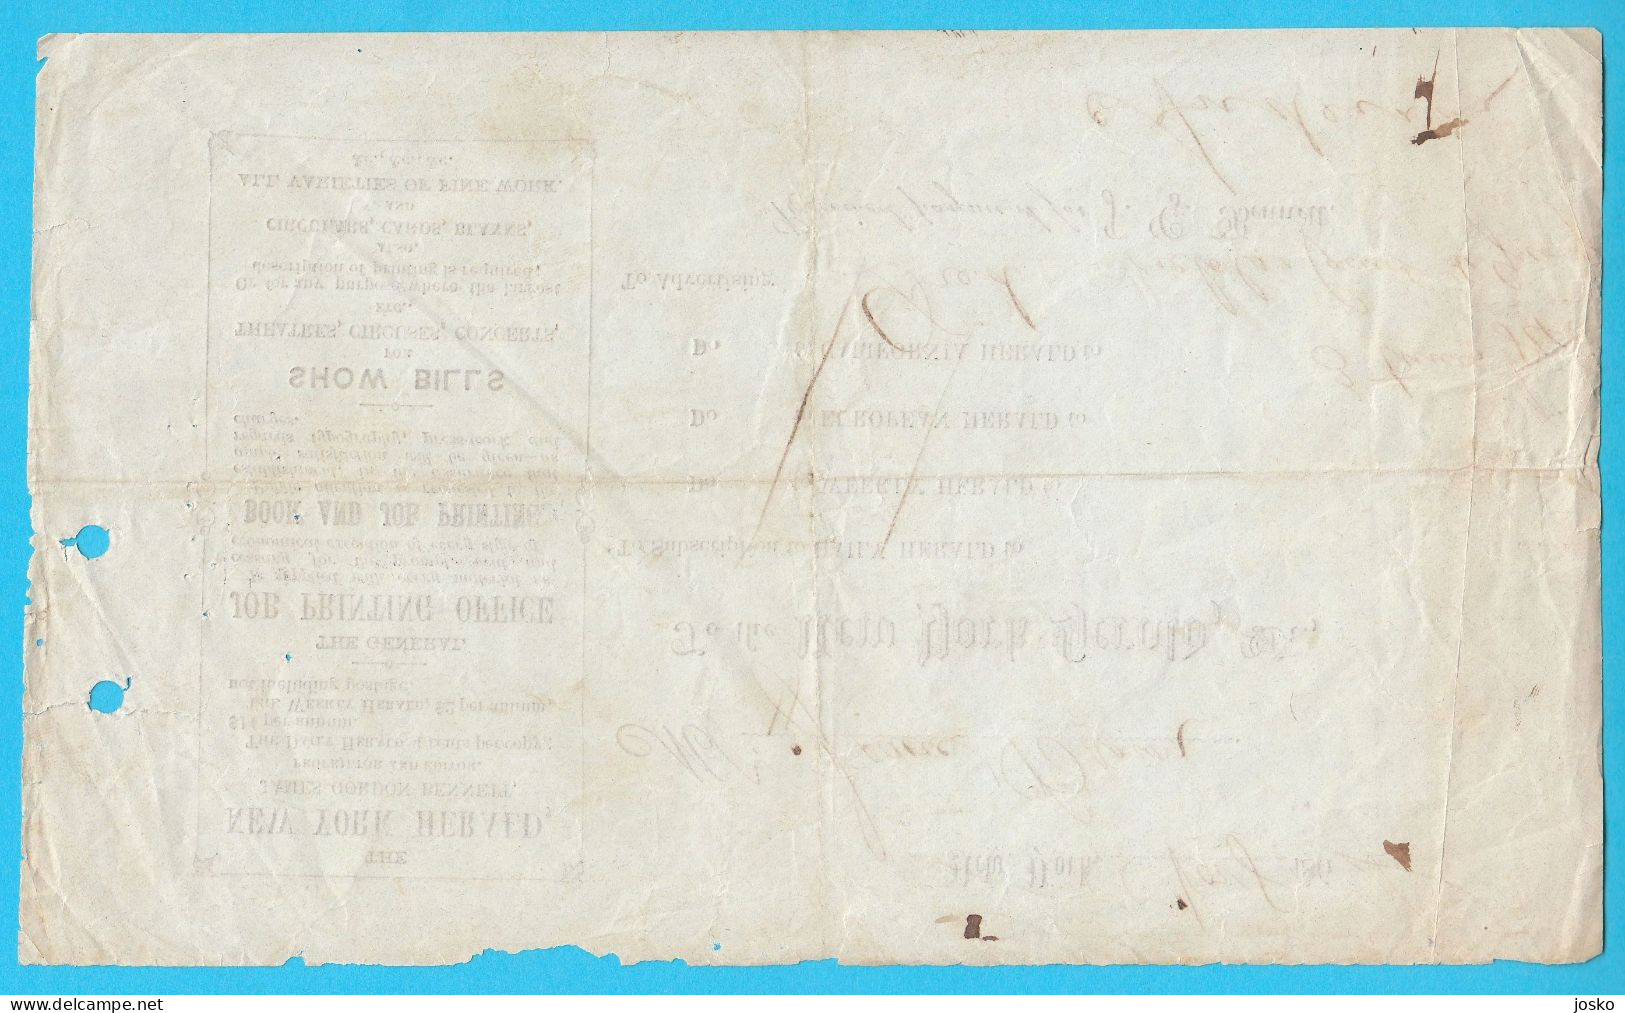 1864 Advertising Payment THE NEW YORK HERALD - Original Vintage Payment Receipt * USA United States Of America - USA